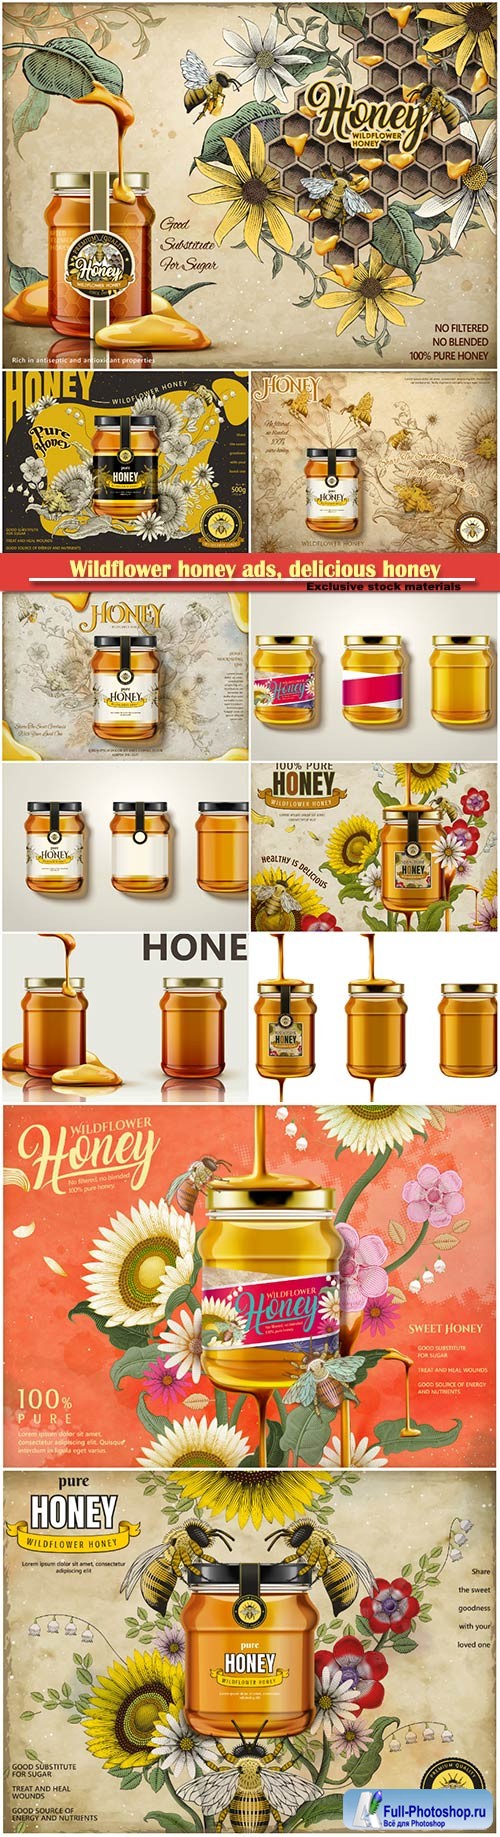 Wildflower honey ads, delicious honey dripping from top with glass jar in 3d illustration, retro flowers elements in etching shading style